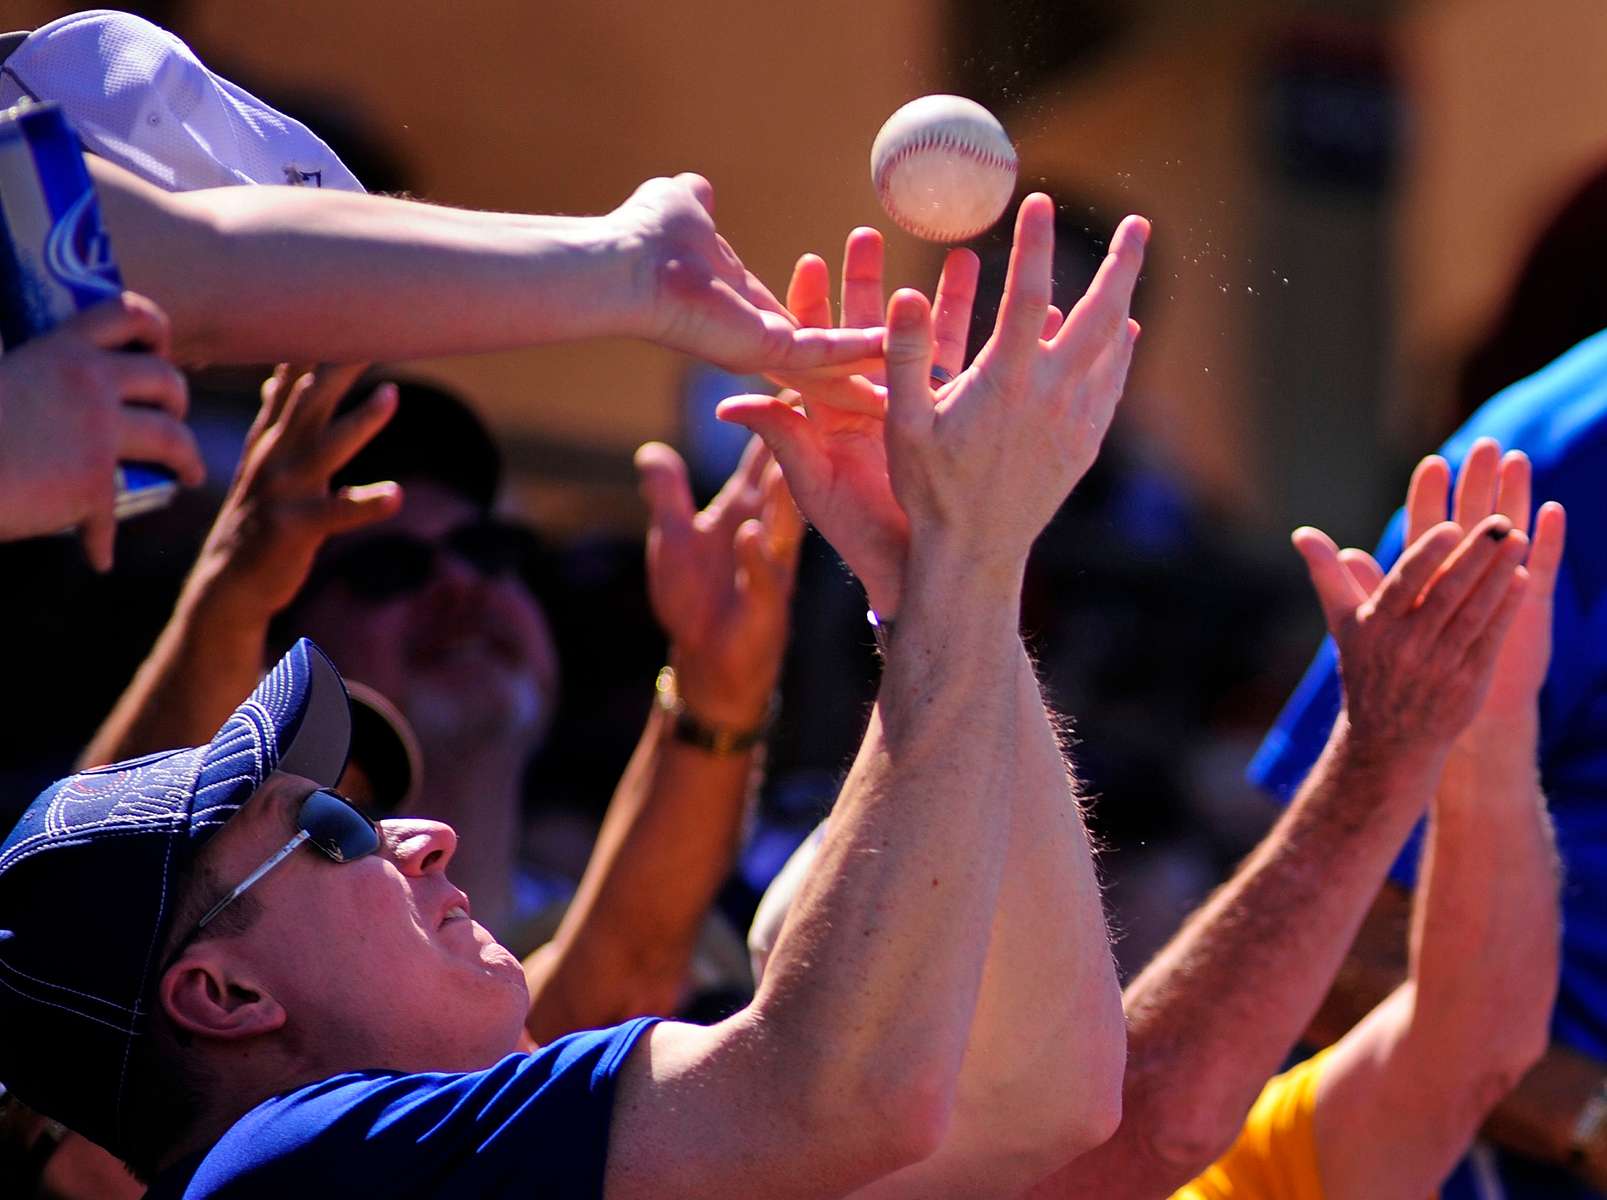 A fan catches a foul ball while the Houston Astros play the Toronto Blue Jays in a spring training exhibition game on Sunday, March 9, 2014 at Osceola County Stadium in Kissimmee, Fla.